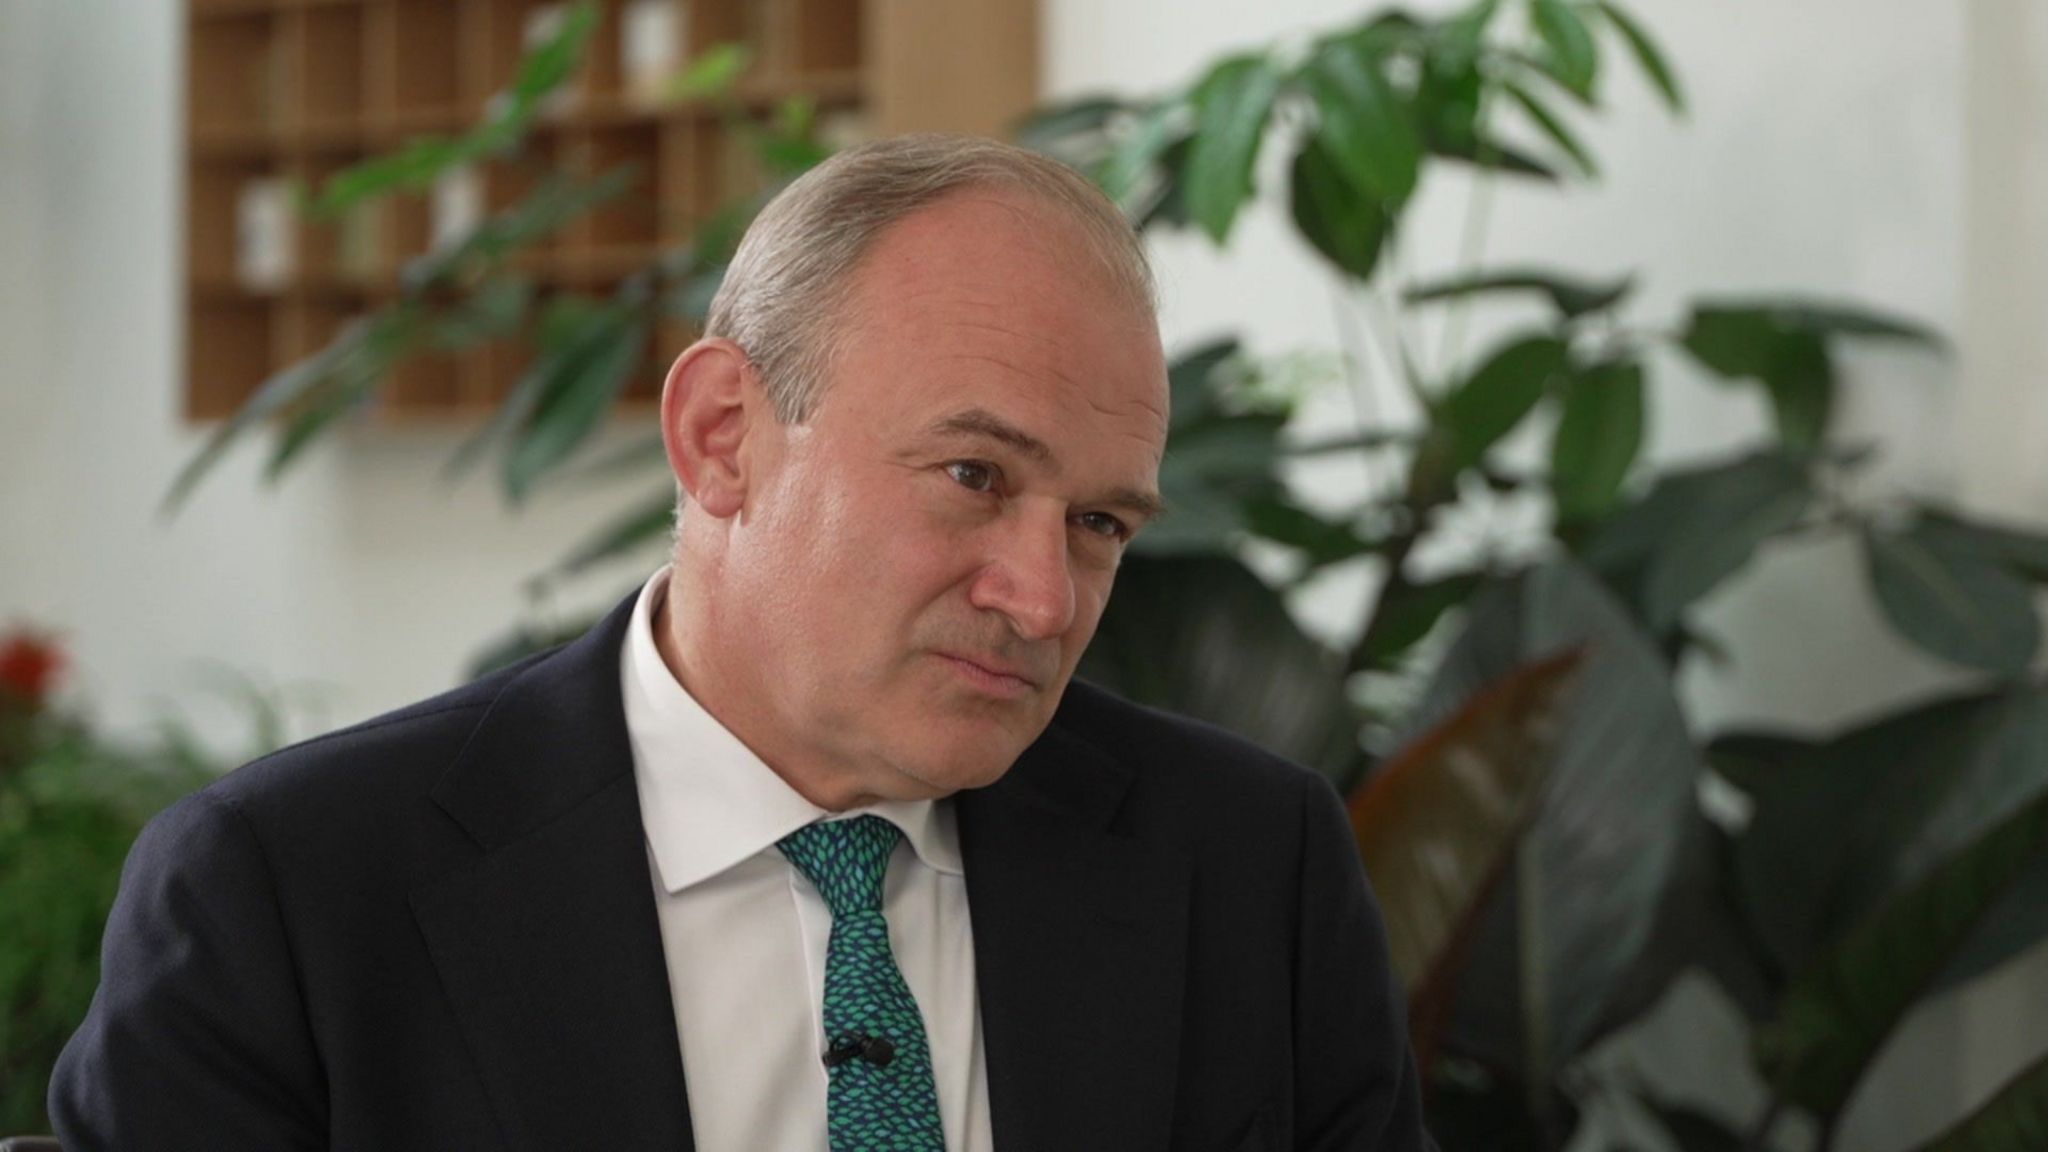 Sir Ed Davey in an interview with the BBC